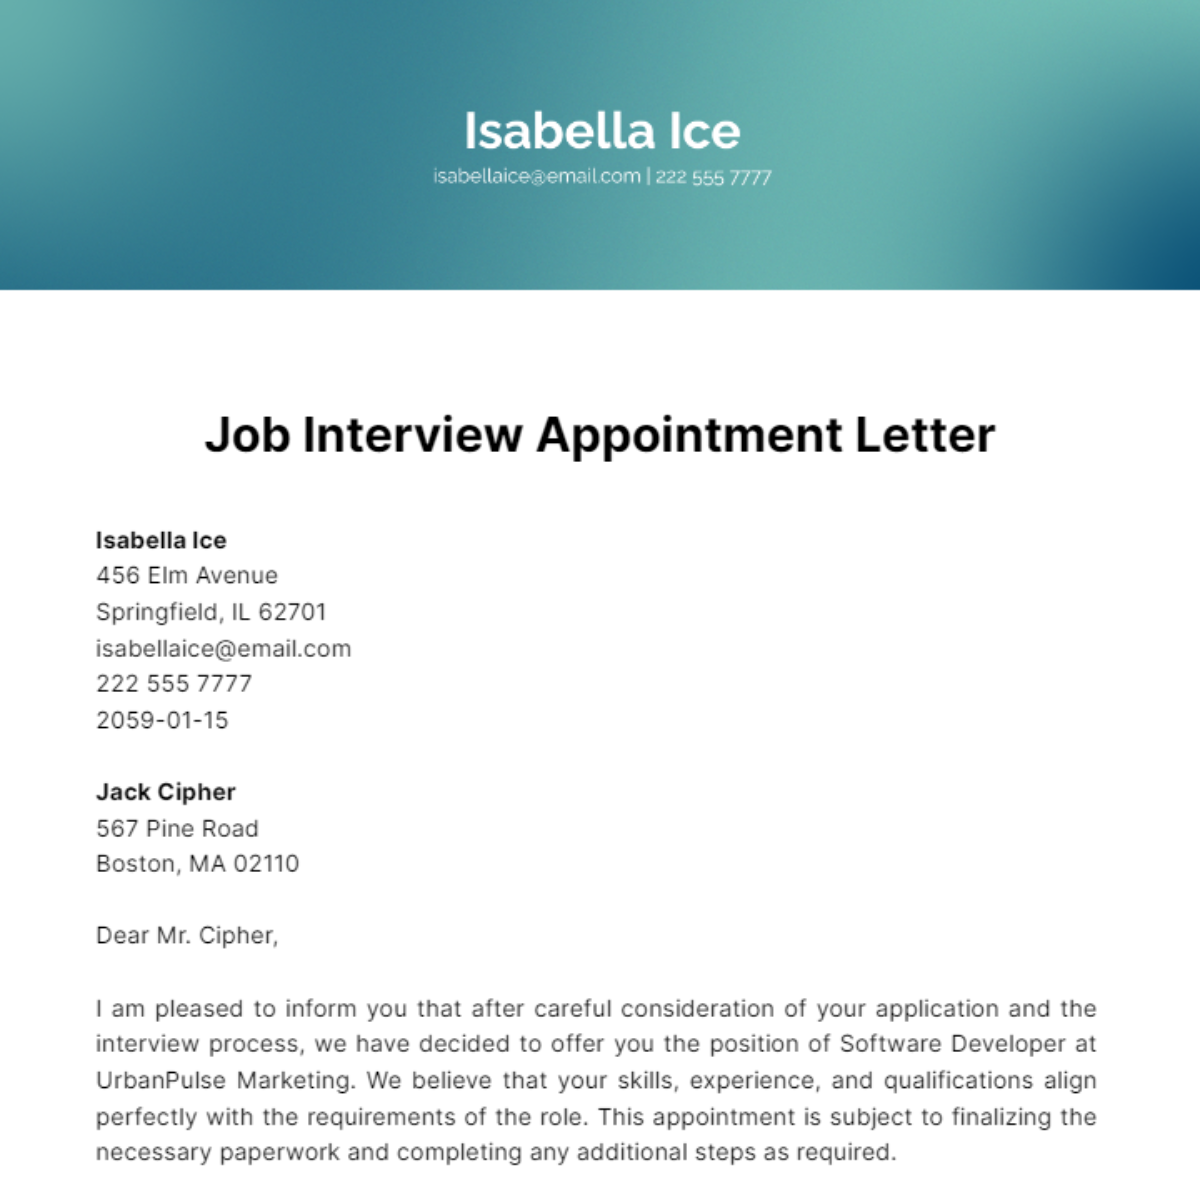 Job Interview Appointment Letter Template